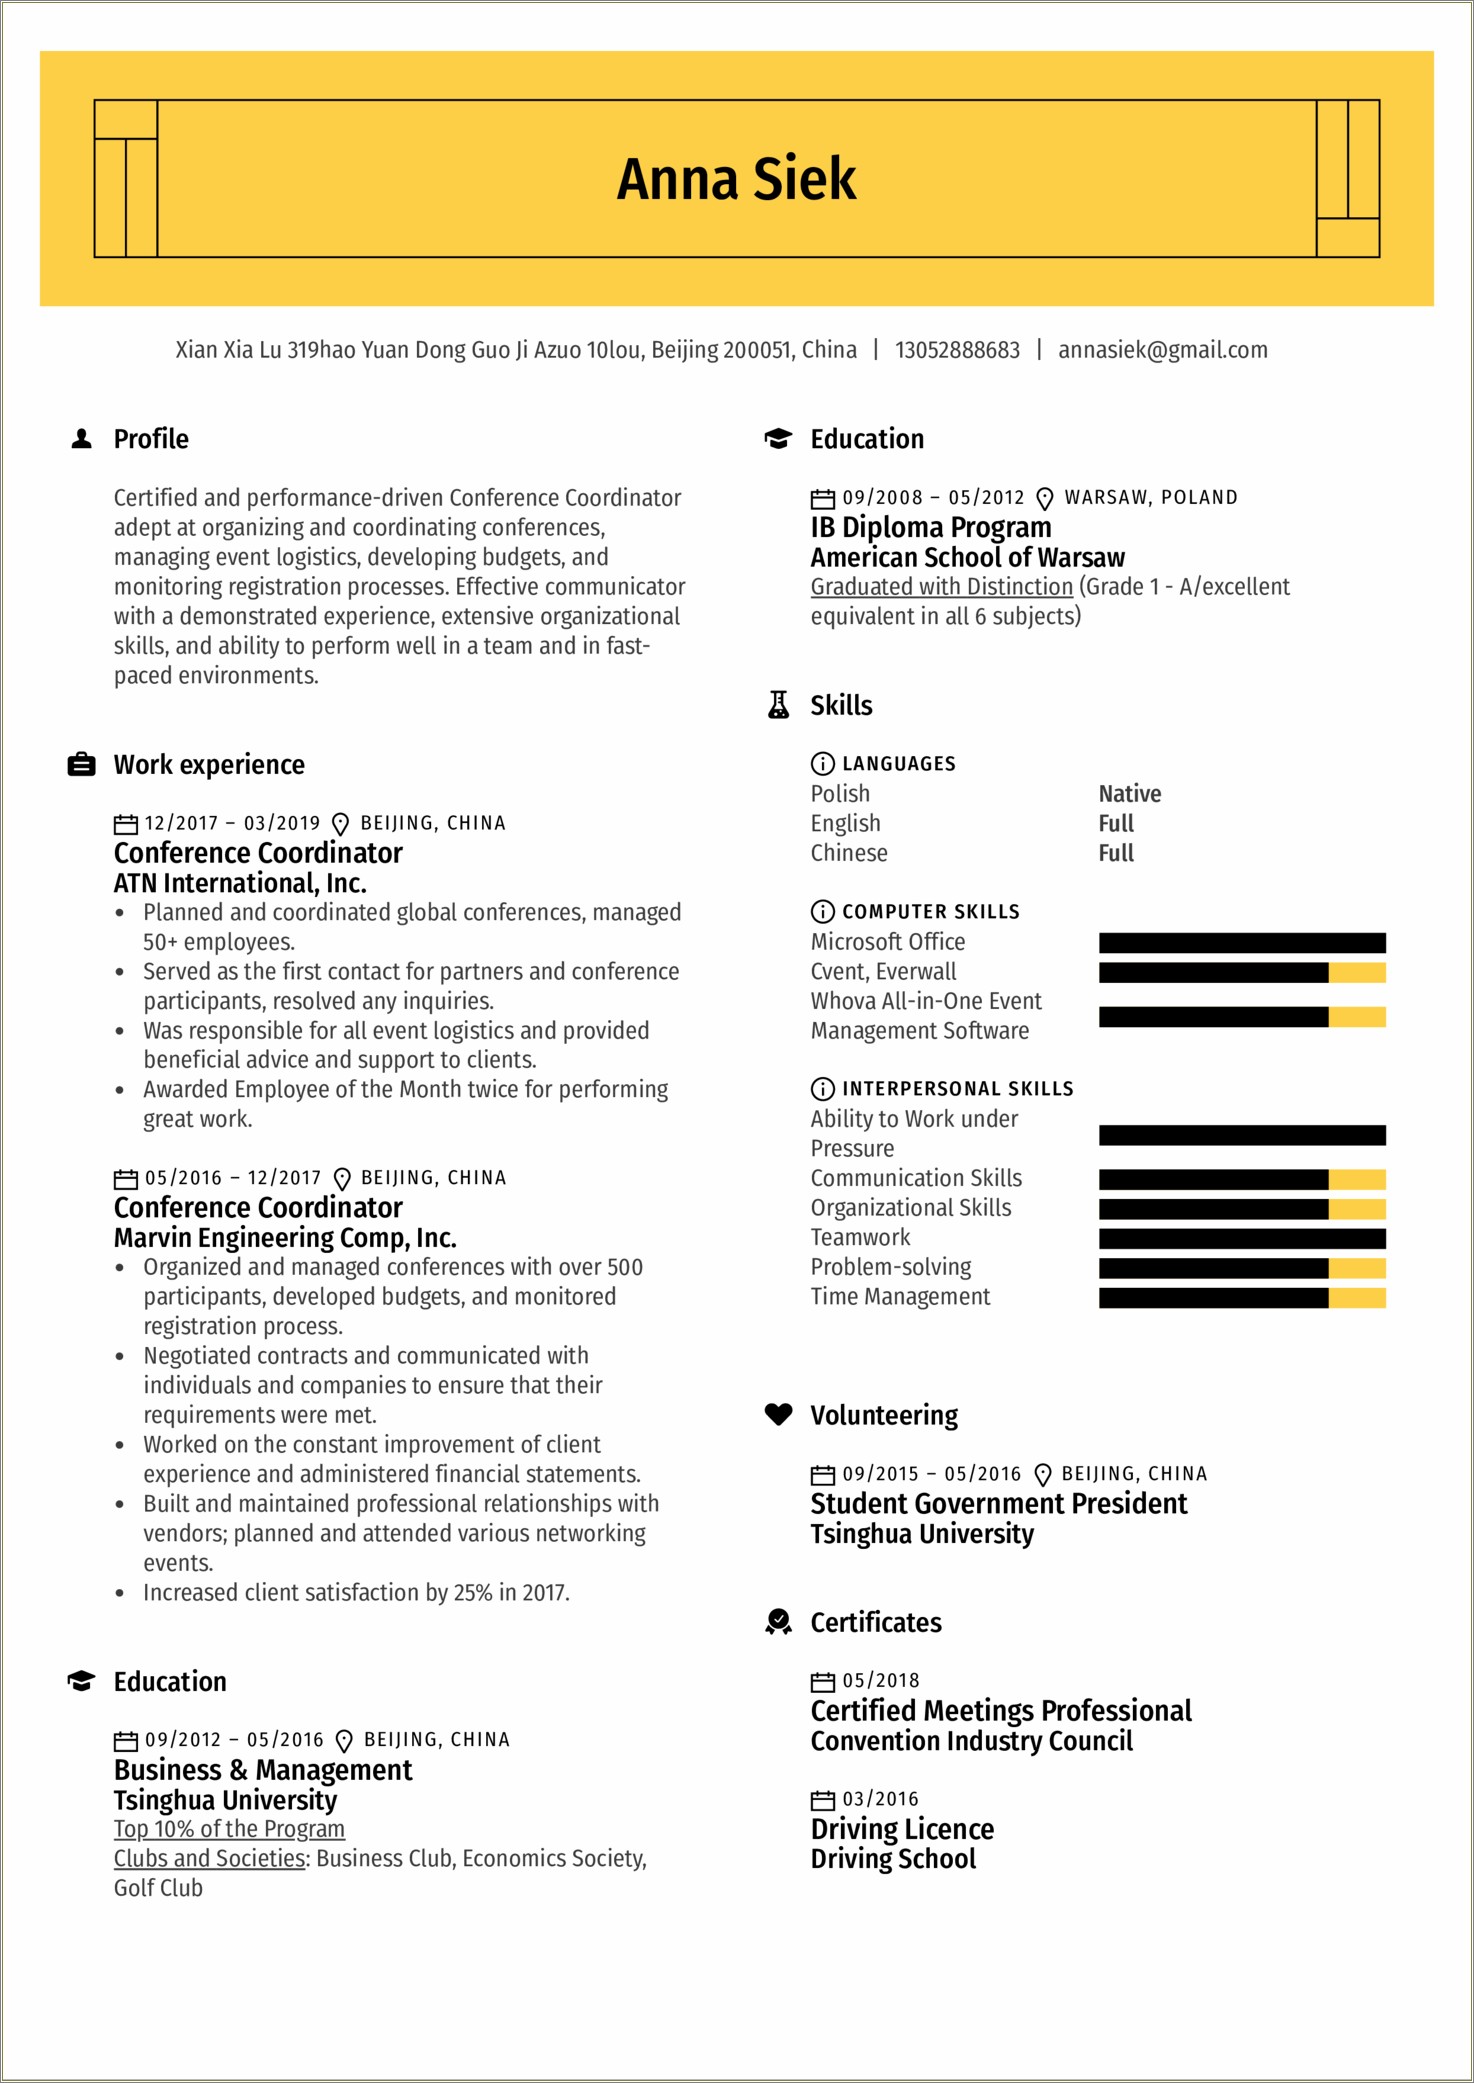 Where To Put Events Planned For Work Resume